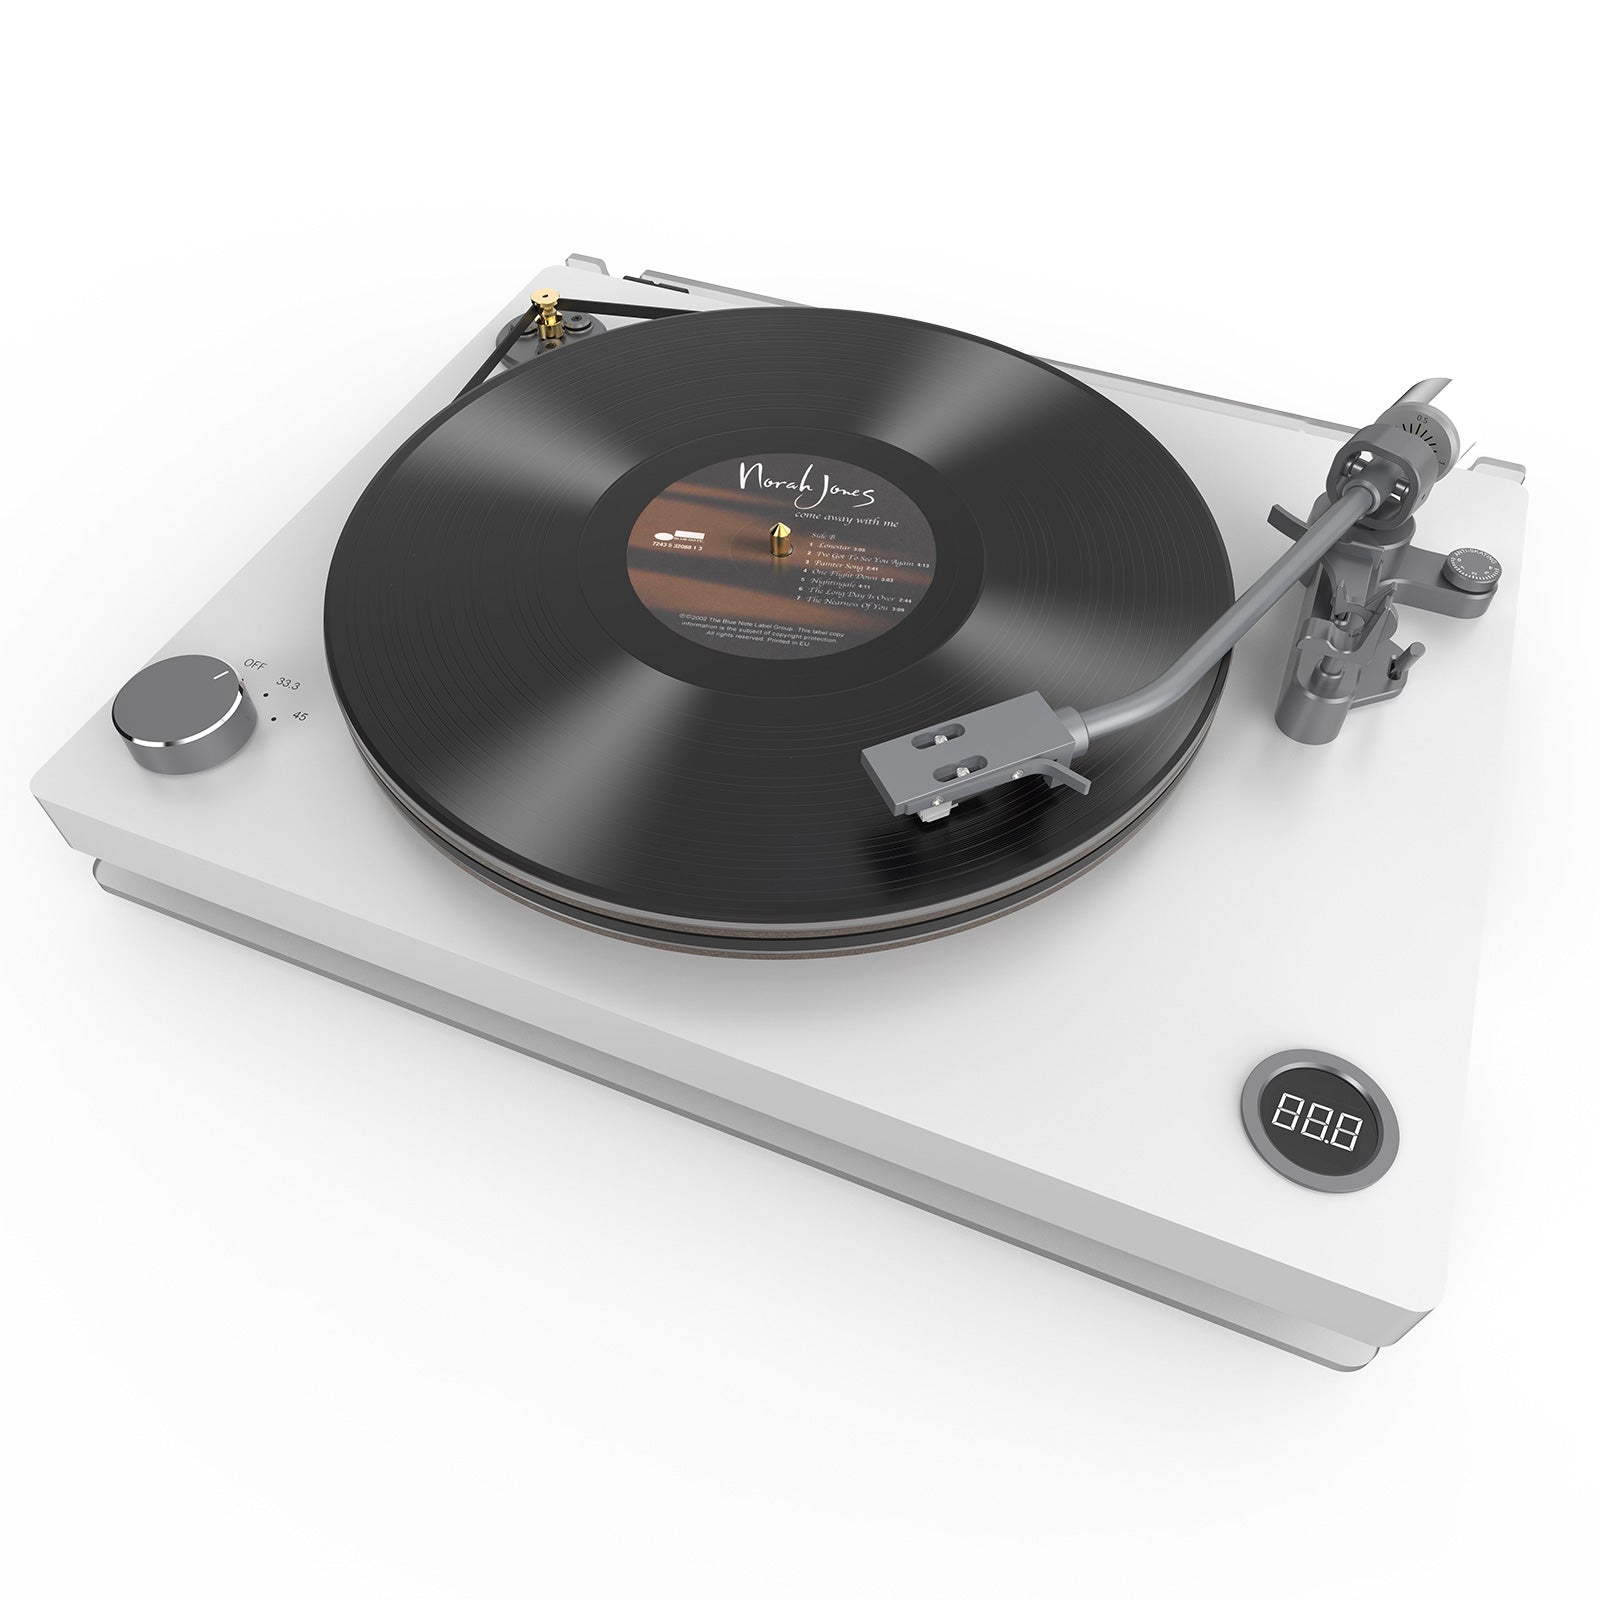 White Acrylic Design Built-in Phono Preamp Turntable with Anti-Skating Control HQKZ-011